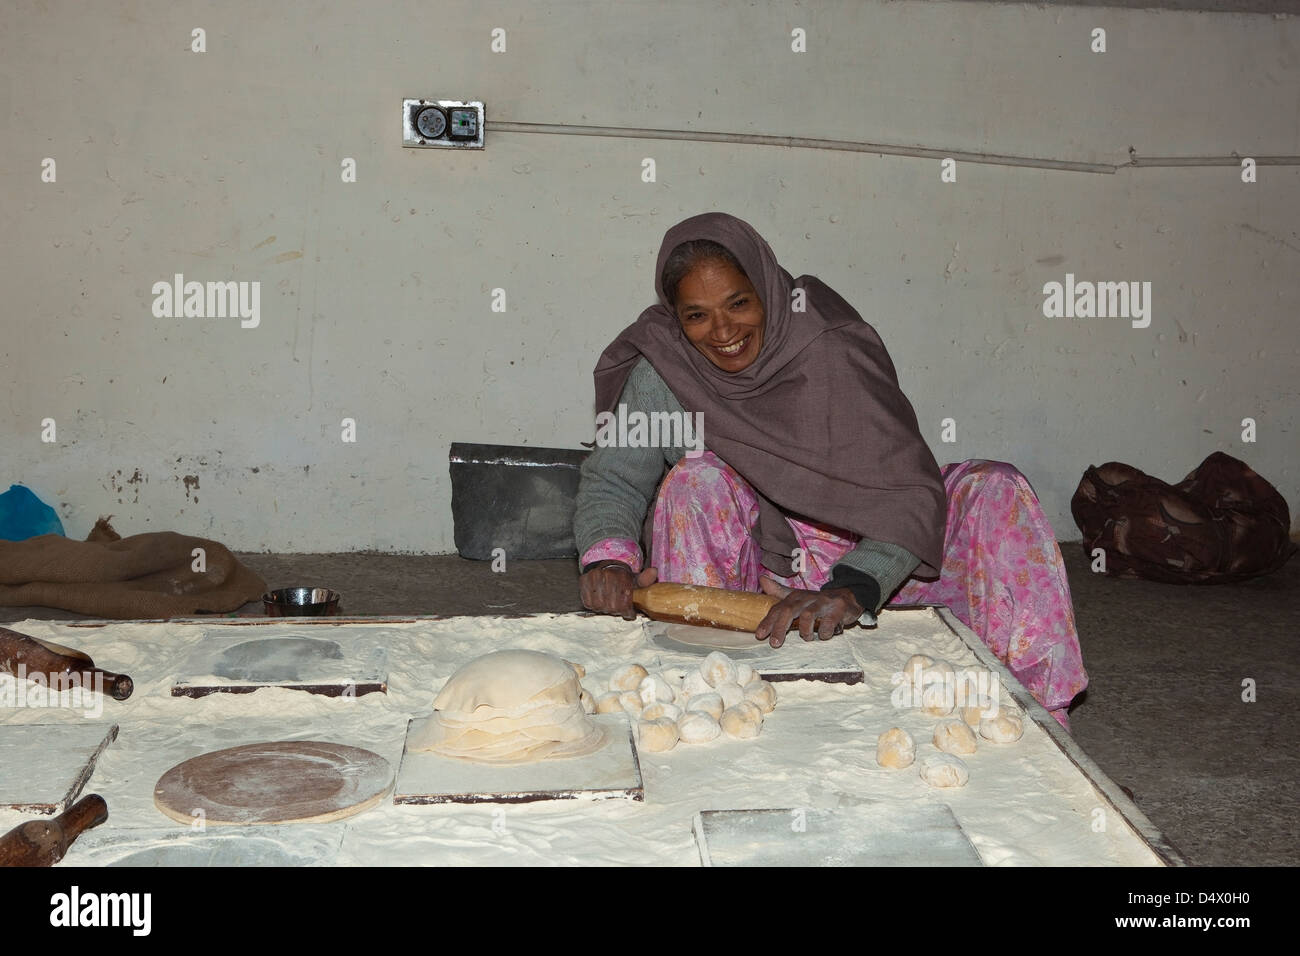 A female volunteer rolling out chapattis at the free kitchen inside the Golden Temple complex Amritsar Punjab India Stock Photo